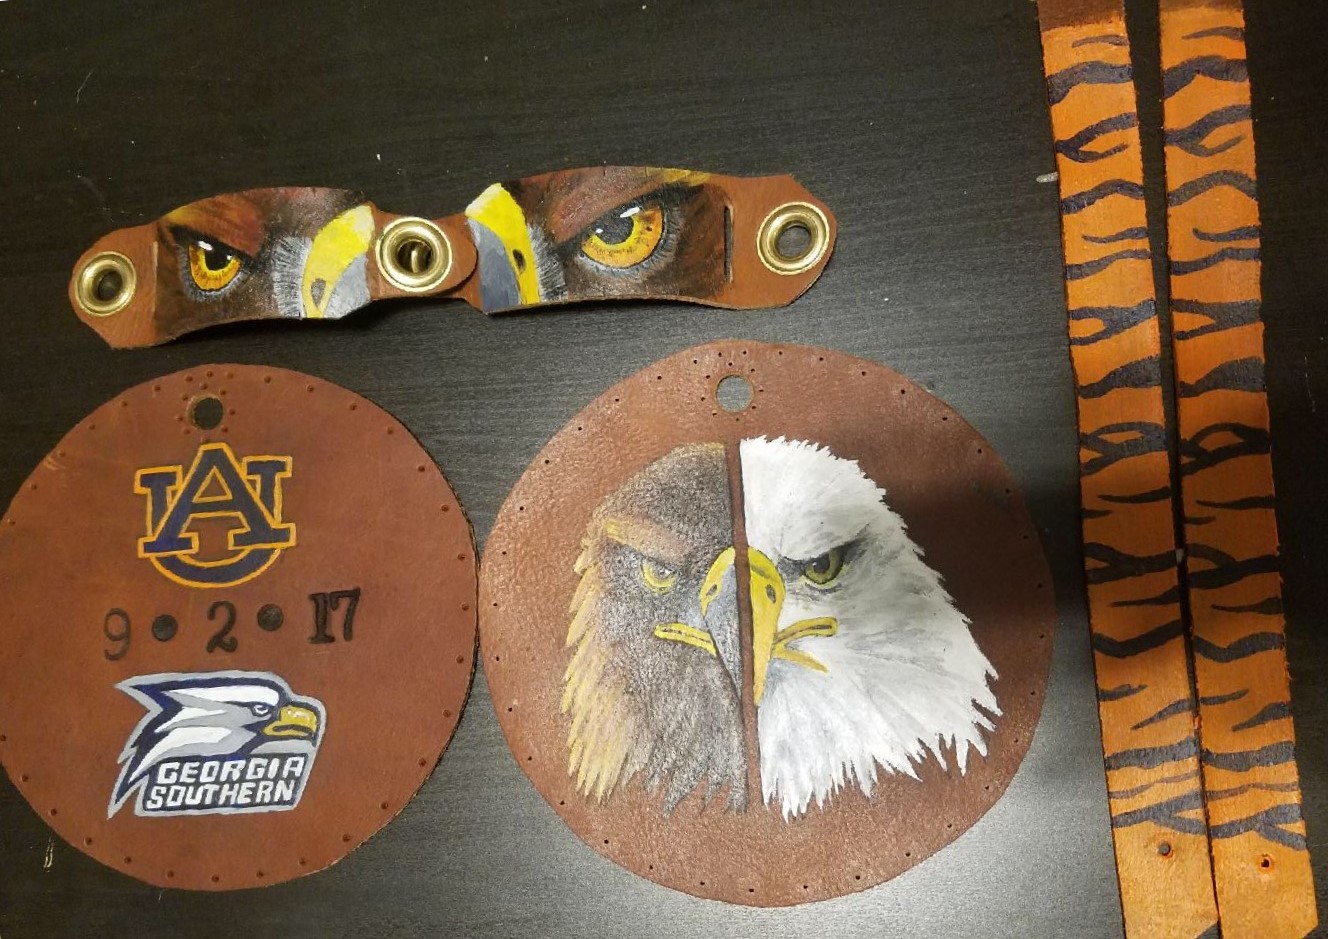 This lure and jess set is for the Sept. 2 pre-game flight of the Auburn eagle.